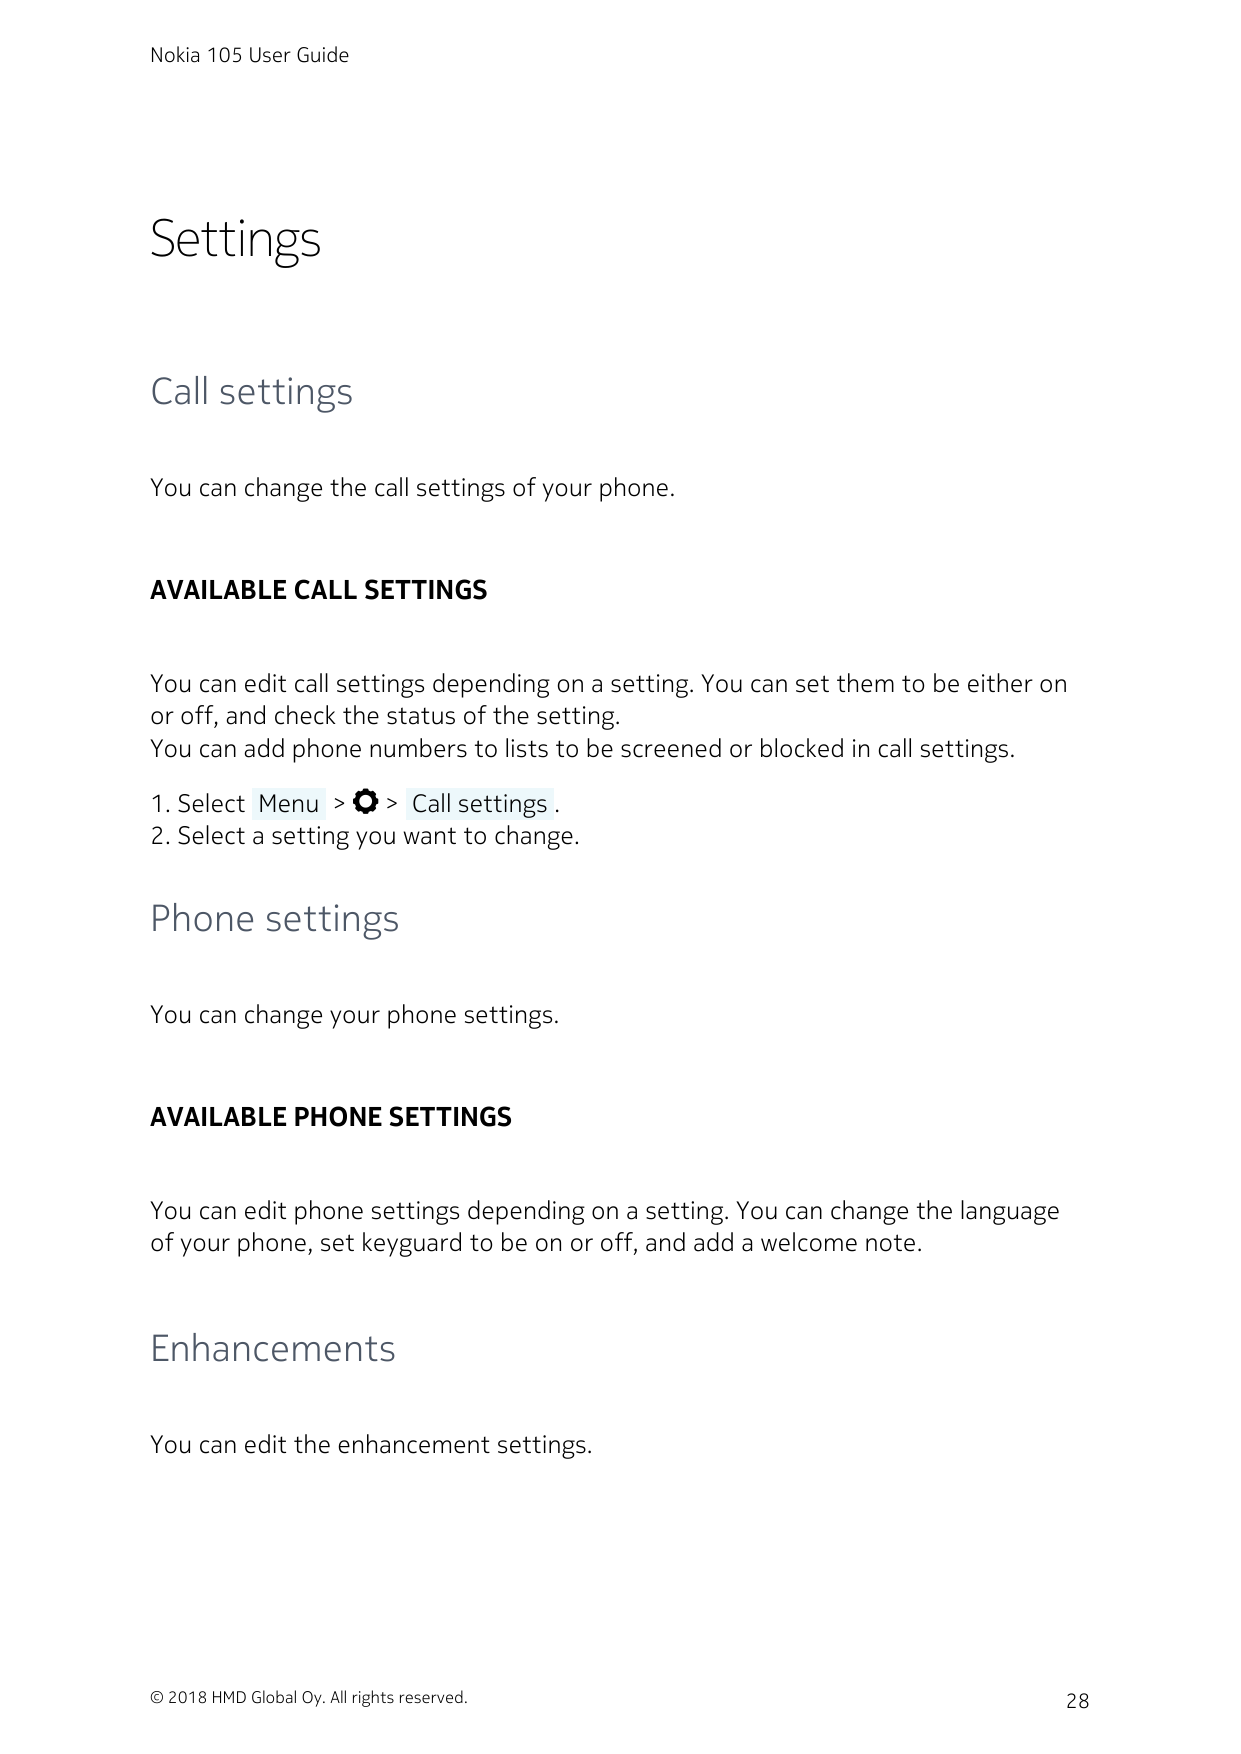 Nokia 105 User GuideSettingsCall settingsYou can change the call settings of your phone.AVAILABLE CALL SETTINGSYou can edit call